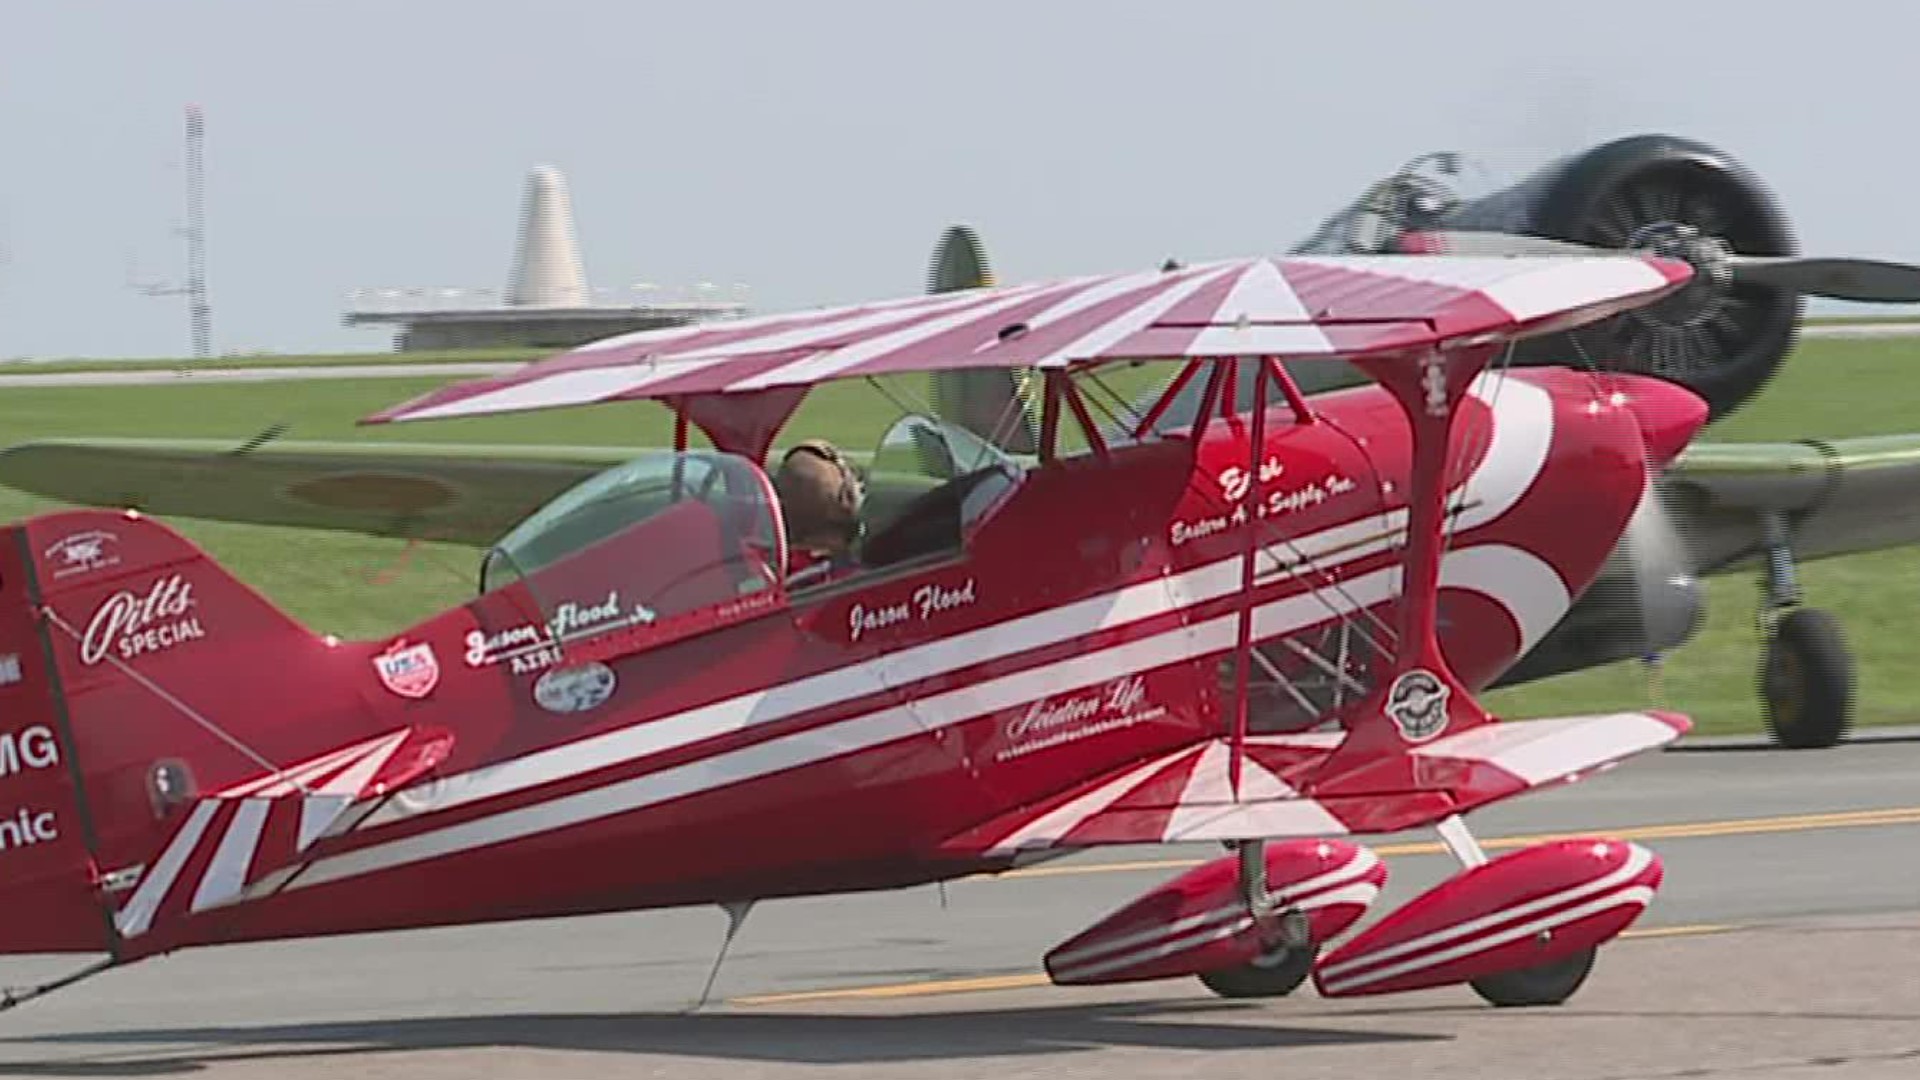 The Capital Wing of the Commemorative Air Force offered rides in a World War Two Boeing PT-17 Stearman bi-plane.